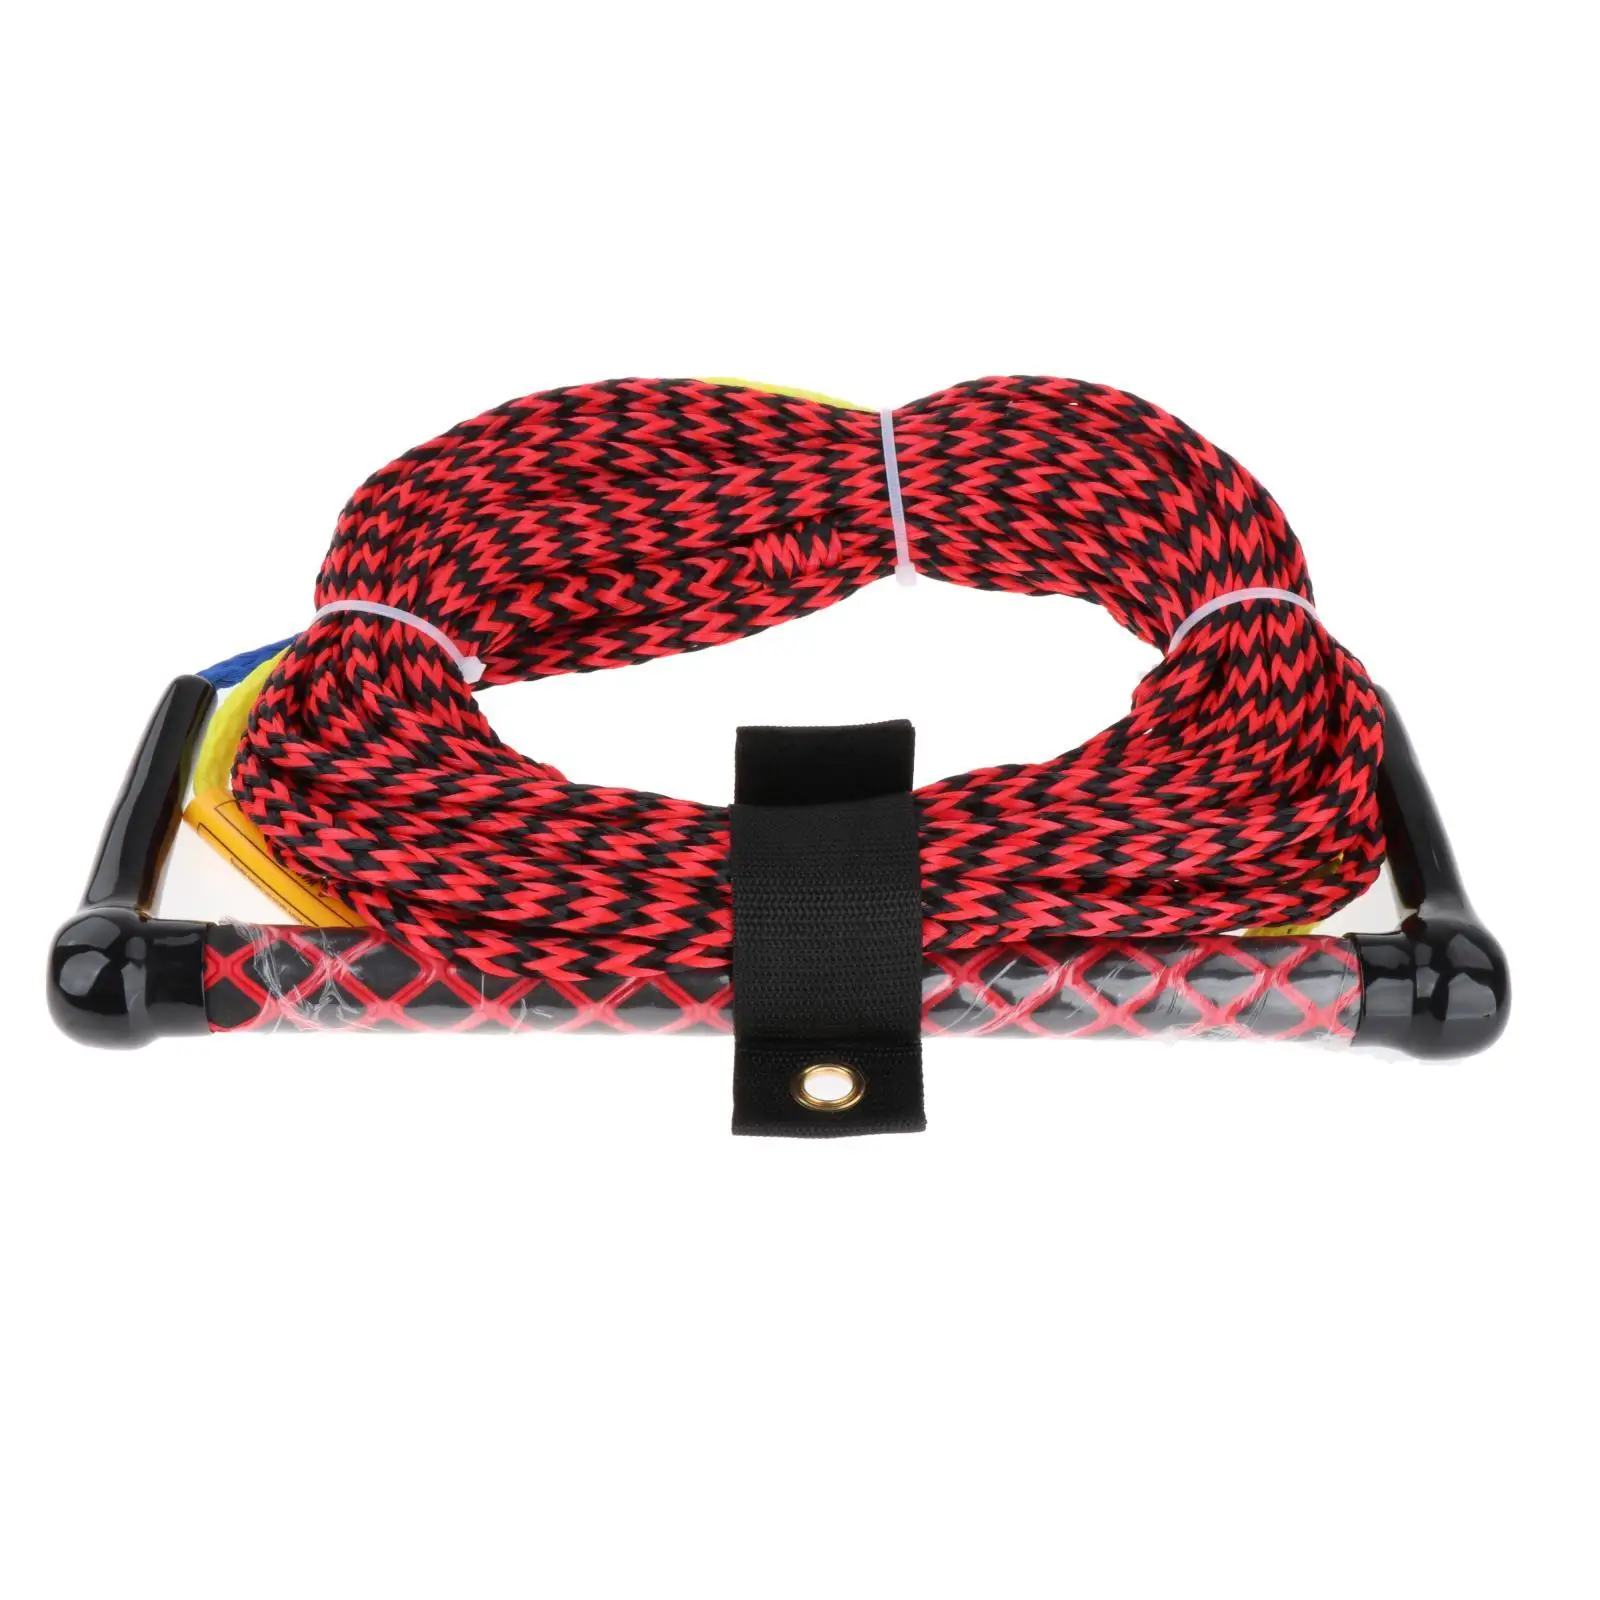 Water Ski Surfing Rope Floating Accs 23M with Handle for Wakeboard Kneeboard